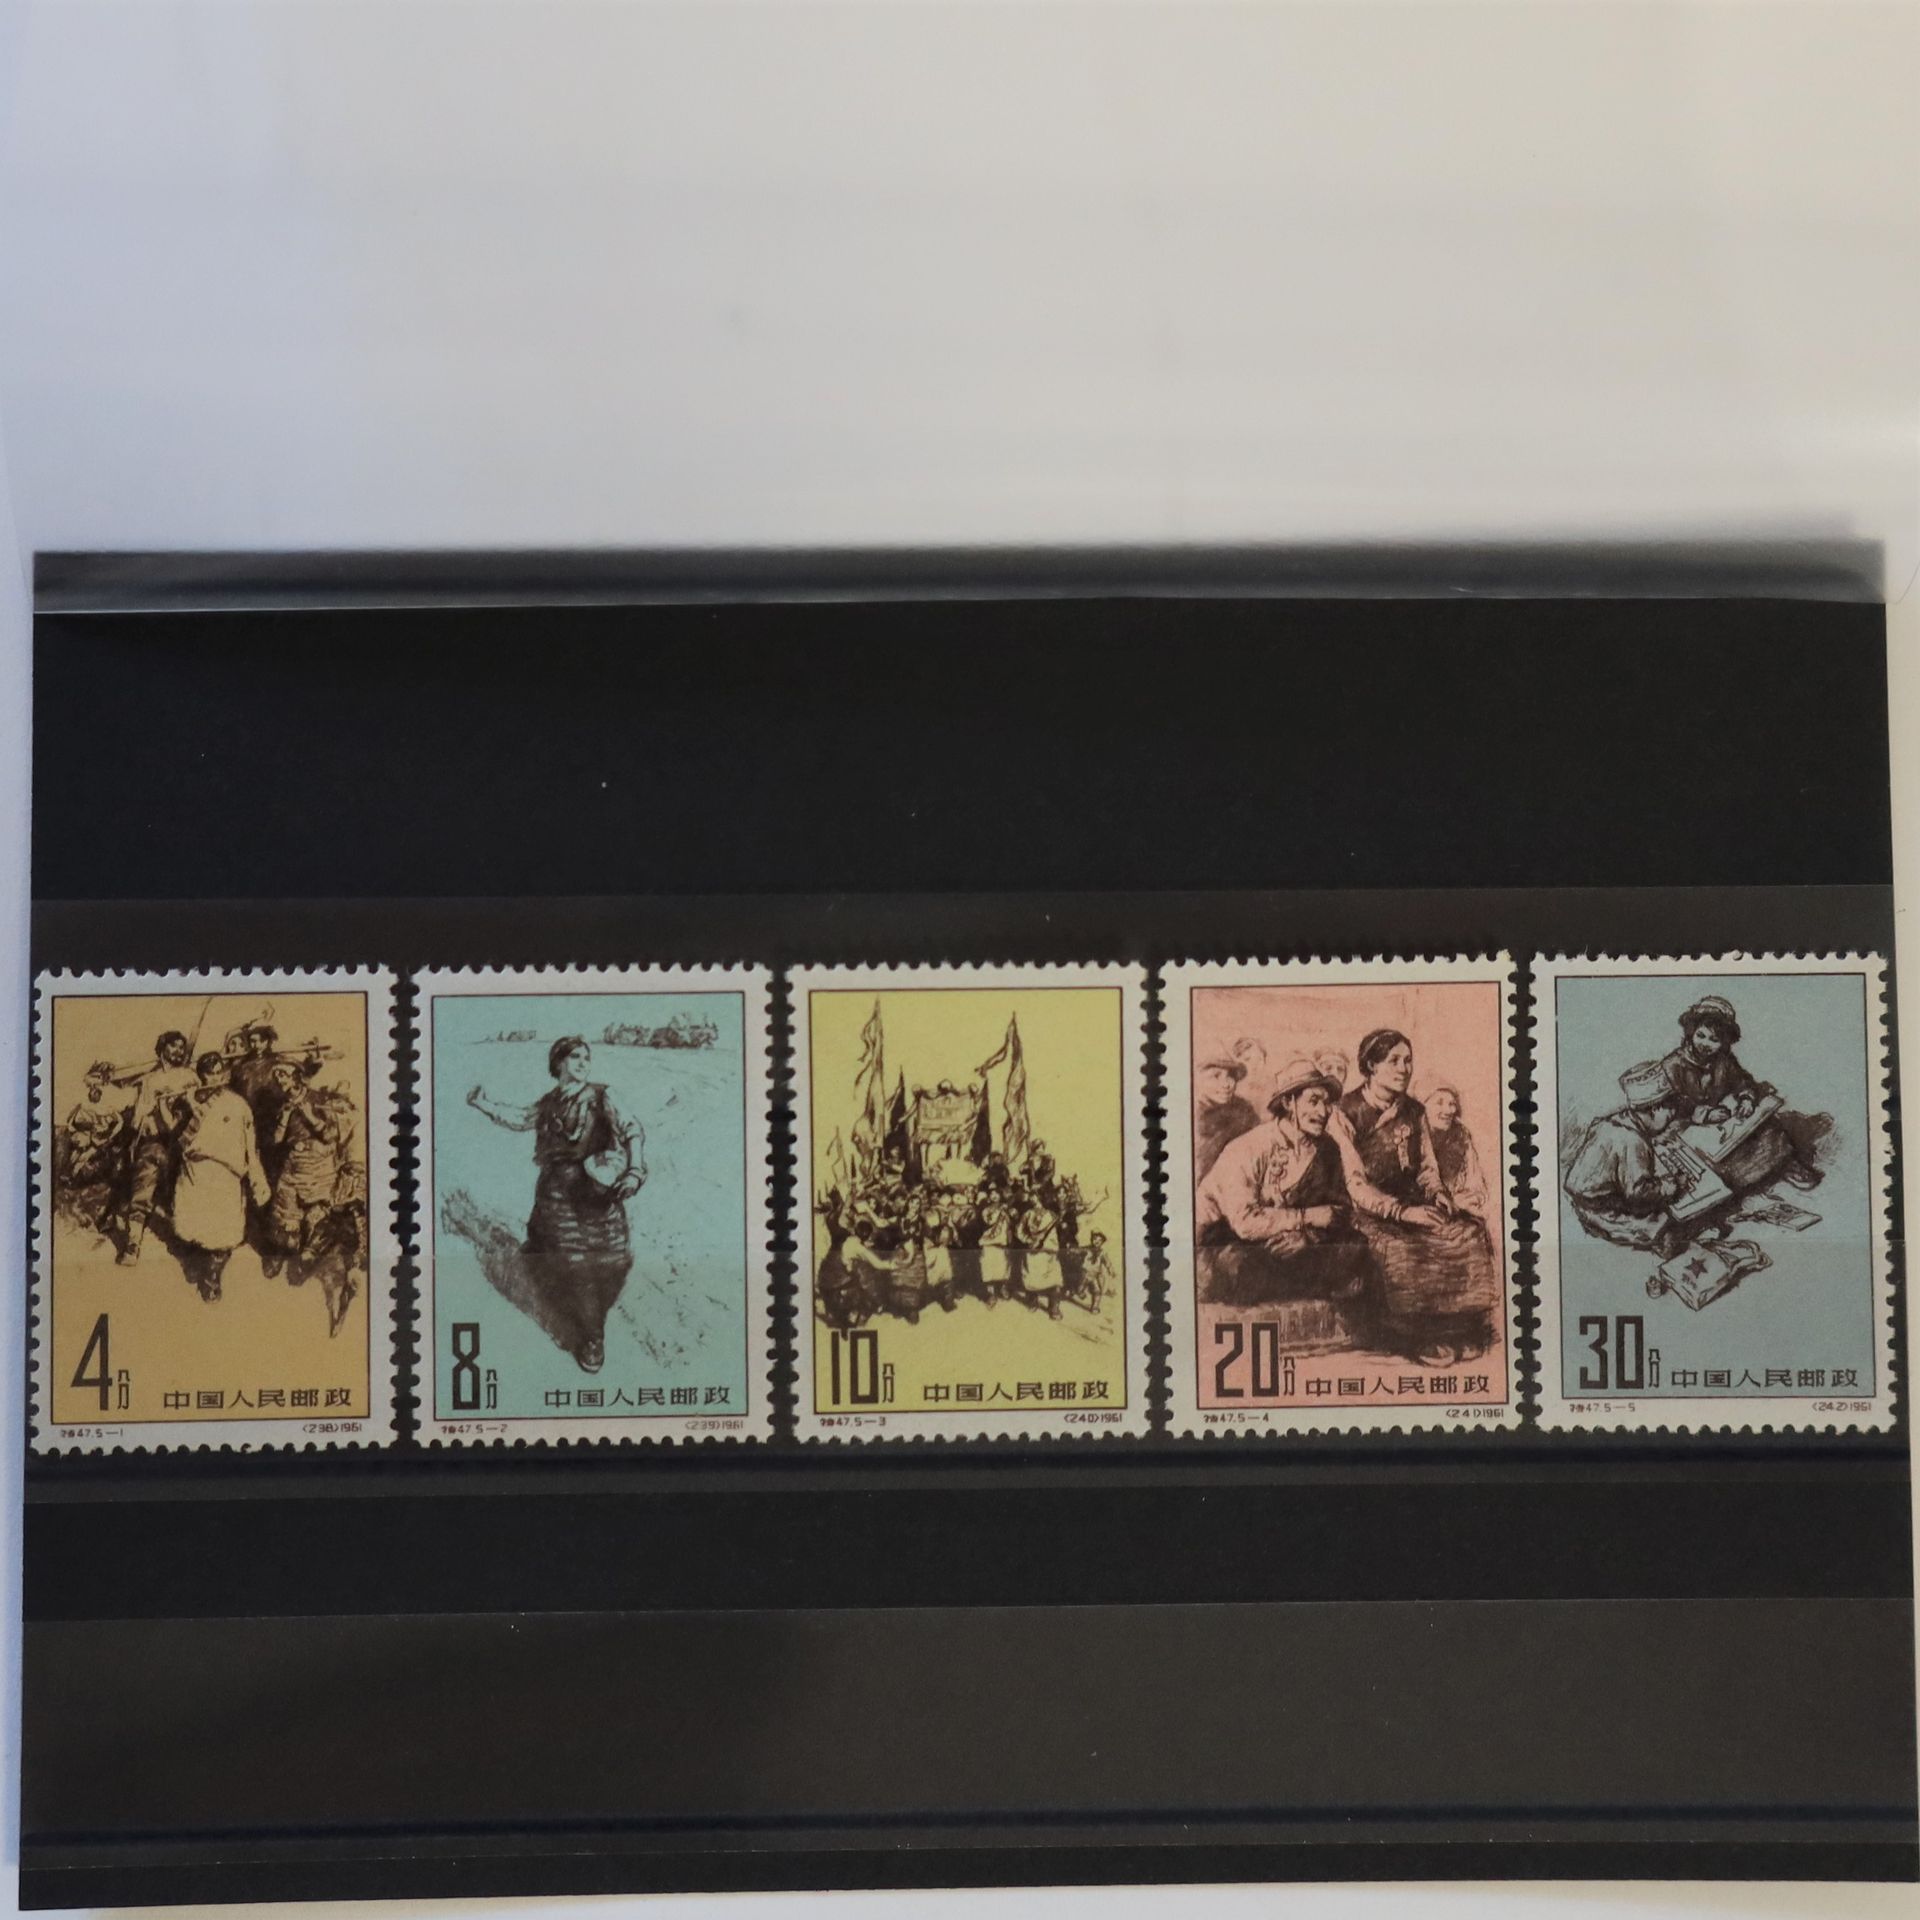 Null [CHINA]
China

Superb complete set n°1374 to 1378 "Renaissance of Tibet", n&hellip;